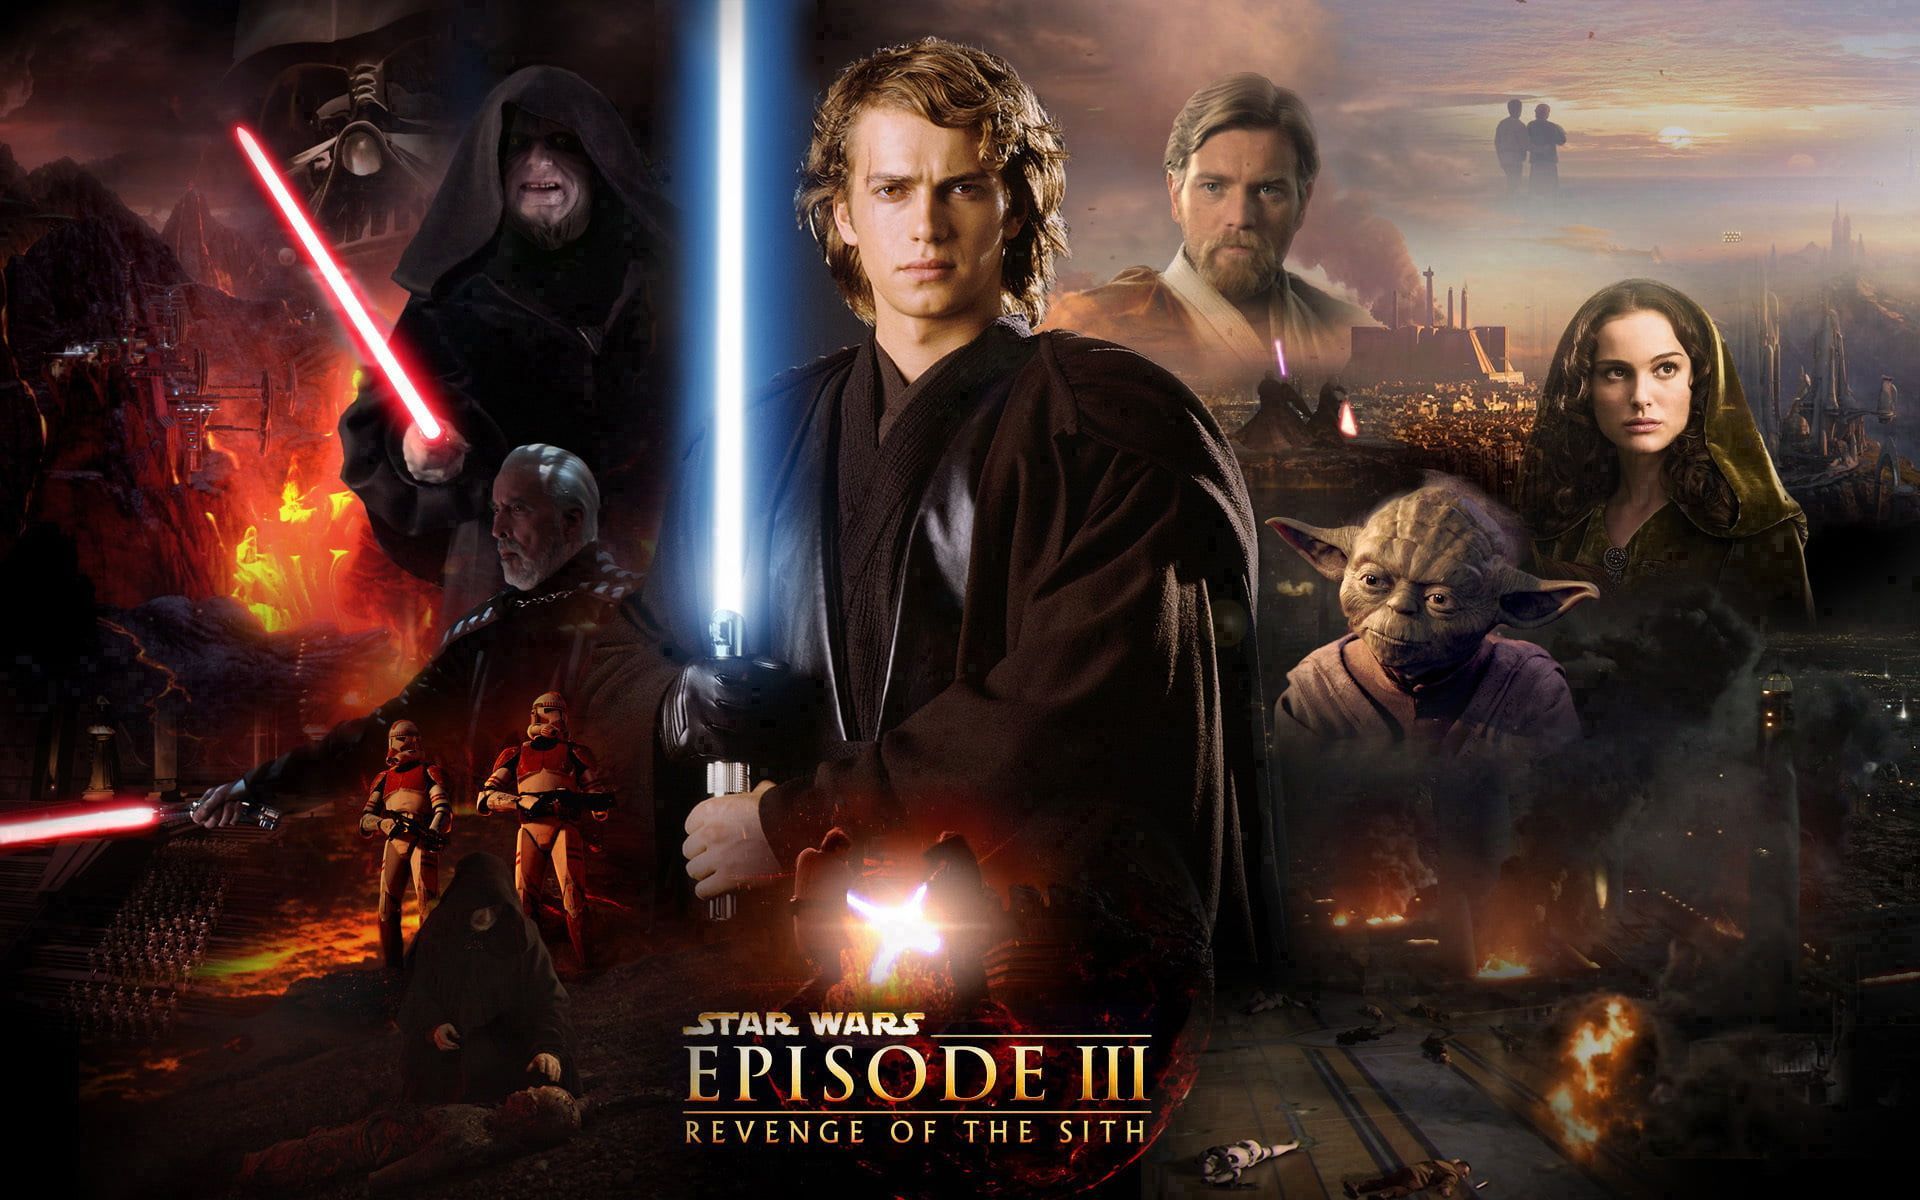 Star Wars Episode II Revenge of the Sith wallpapers Star Wars...